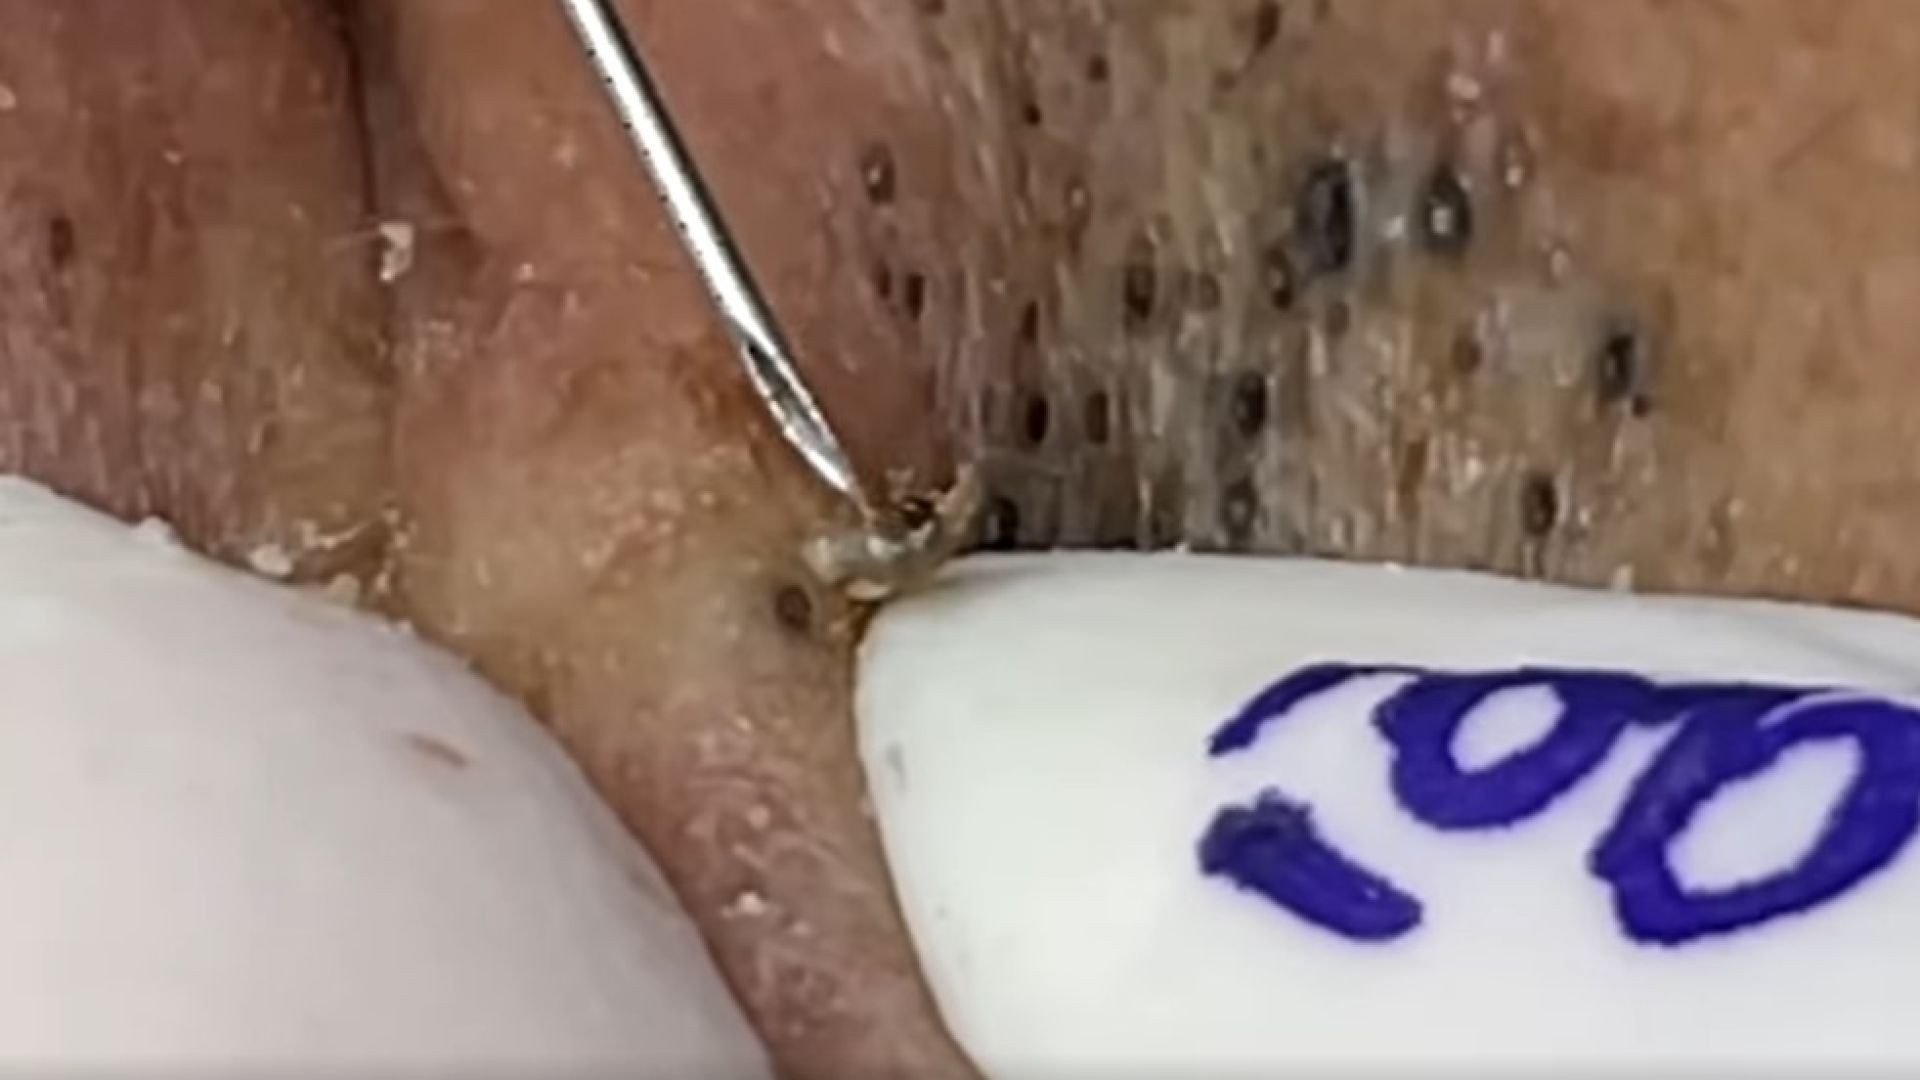 Satisfying Blackhead Removal of Monster-Size on Face